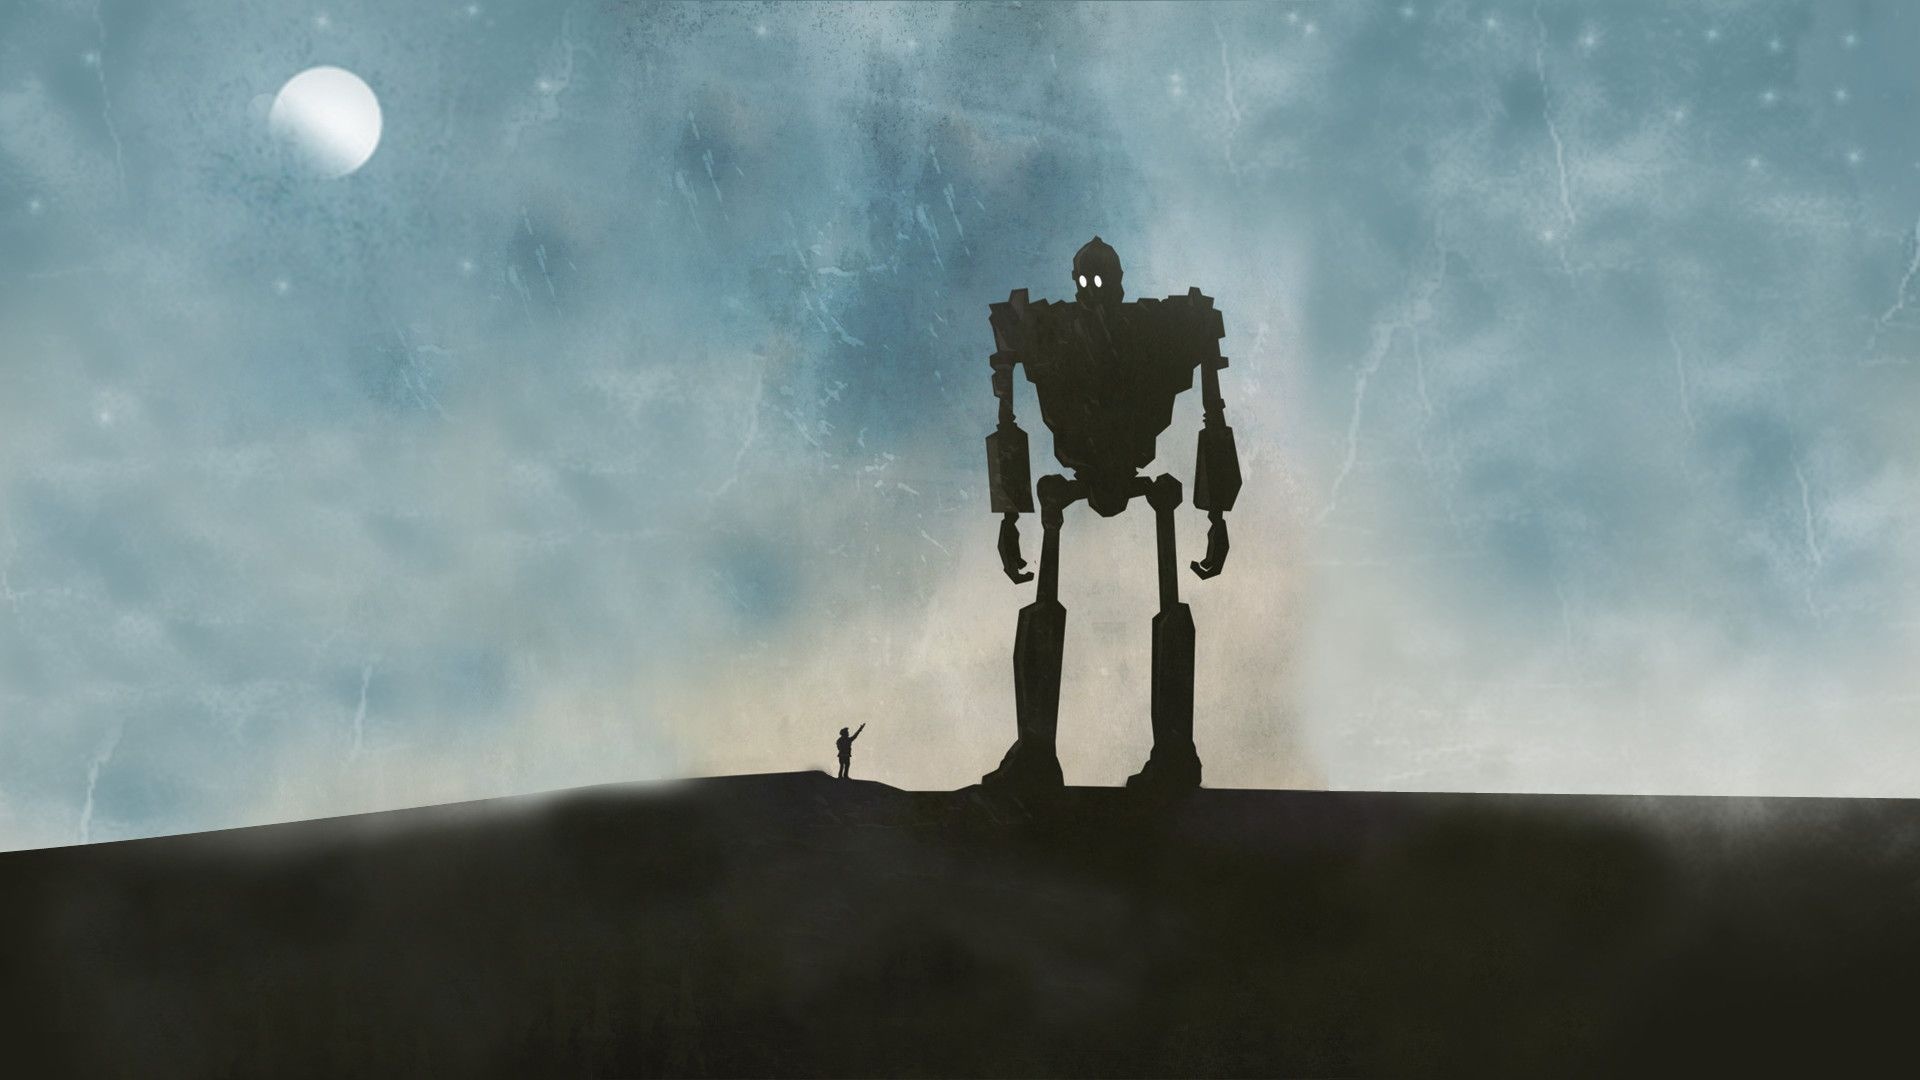 Iron Giant wallpapers, Top-quality backgrounds, Fan-favorite movie, Stunning imagery, 1920x1080 Full HD Desktop